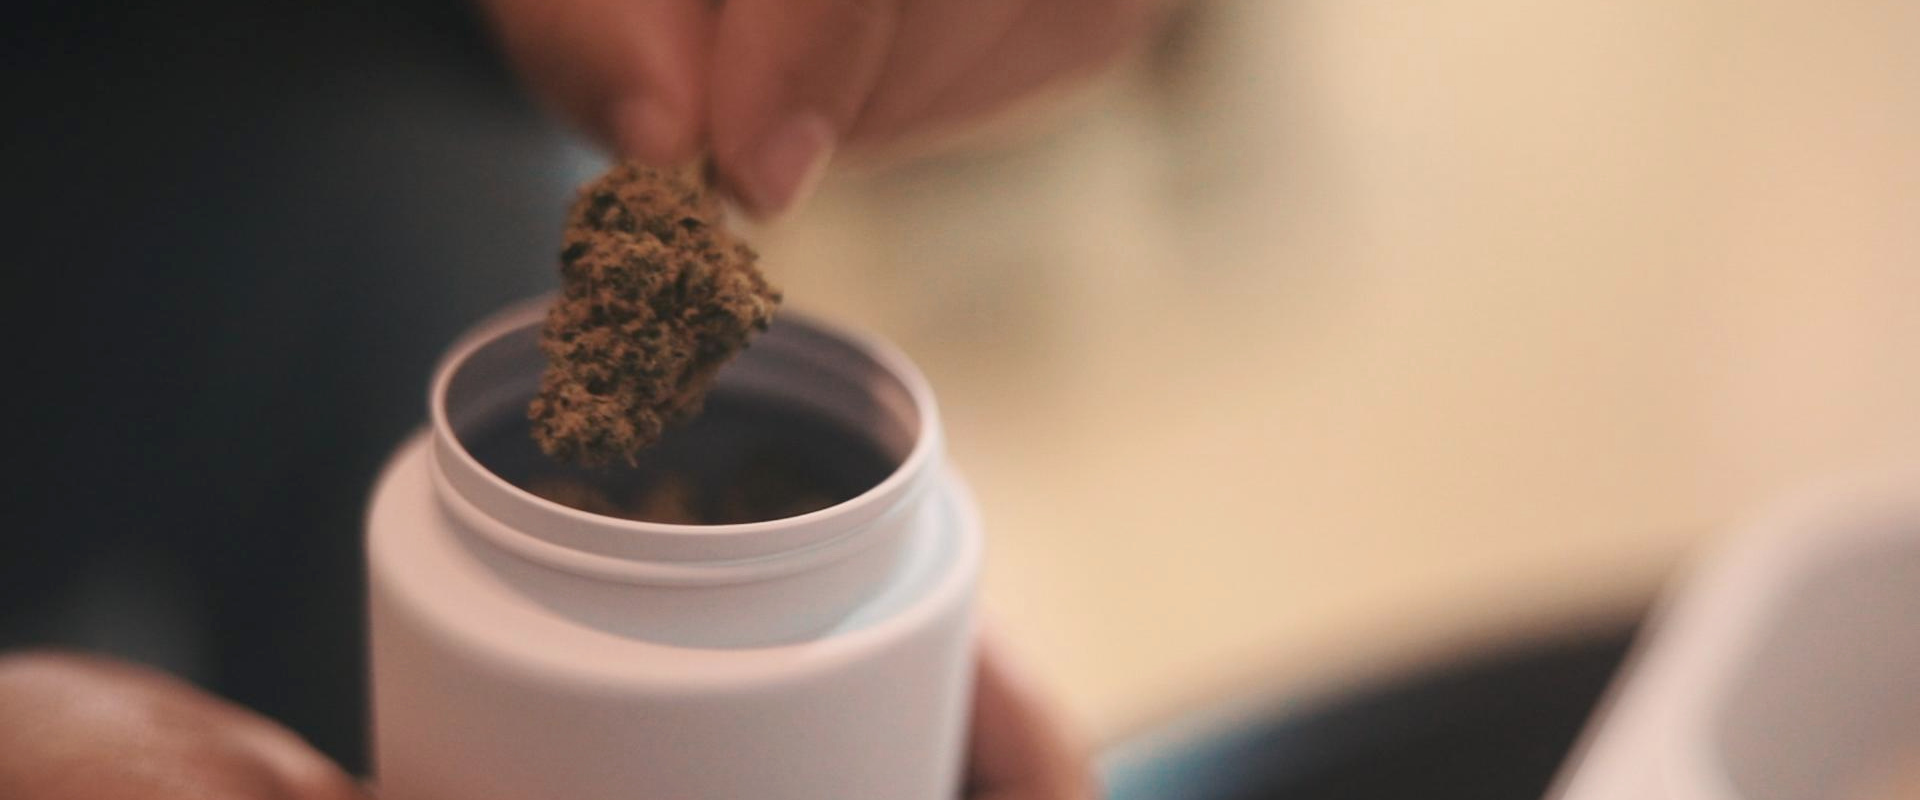 How To Rehydrate Weed: A Step-by-Step Guide